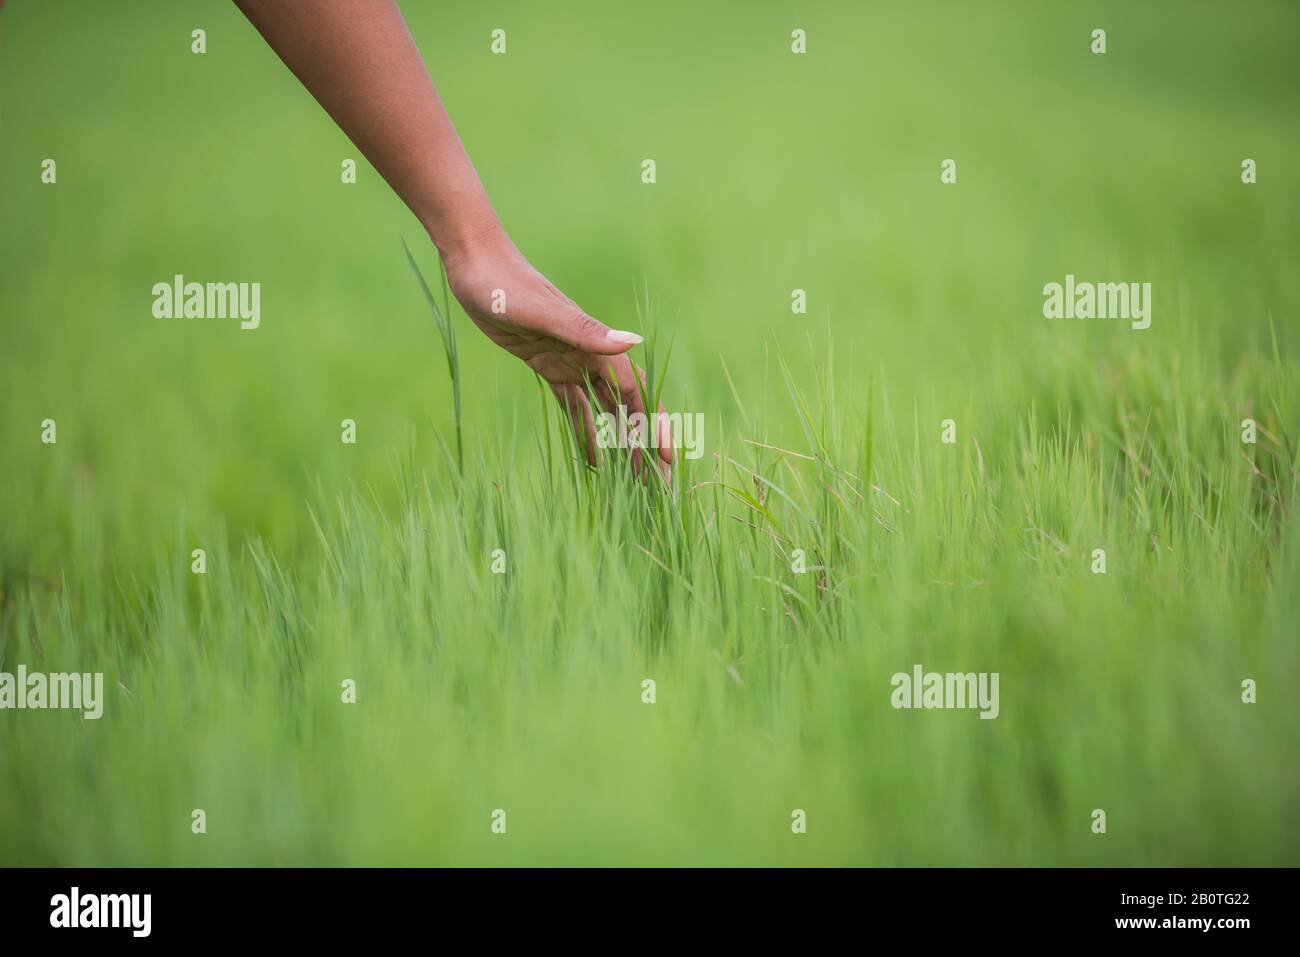 Hand touching grass stock photo. Image of stem, growing - 39121604